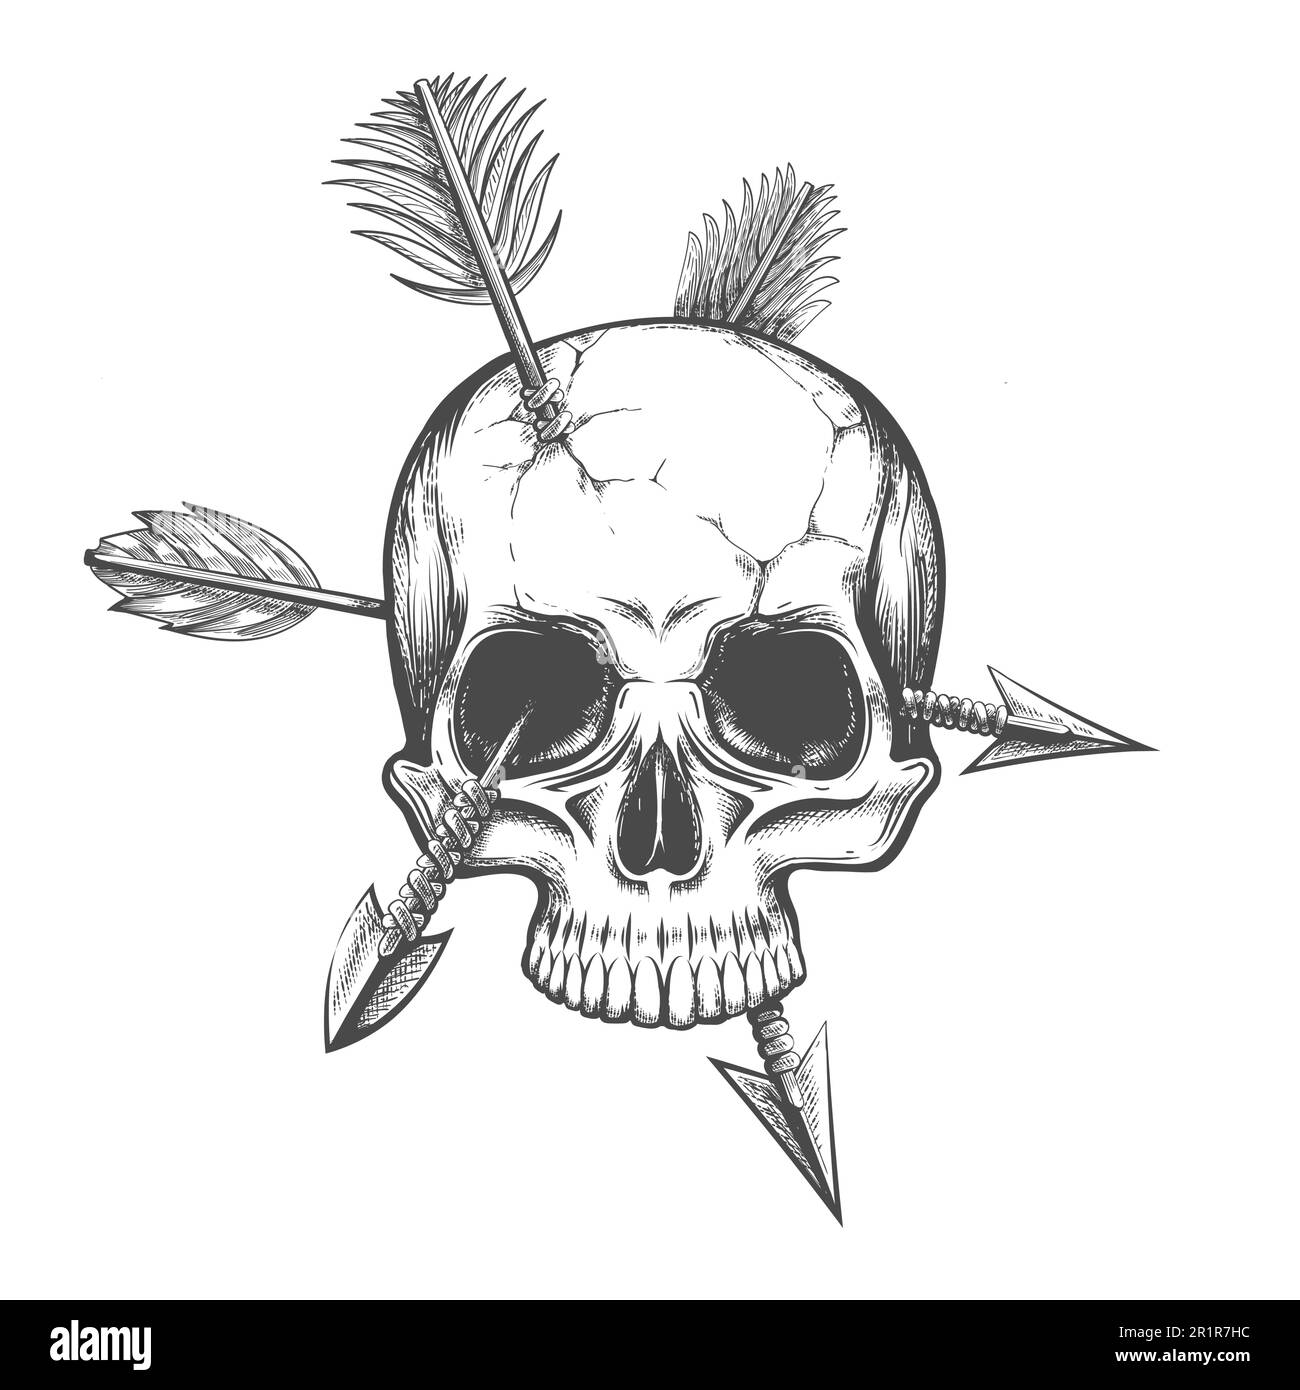 Monochrome Tattoo Of Skull Pierced By Three Arrows In Engraving Style Isolated On White Vector